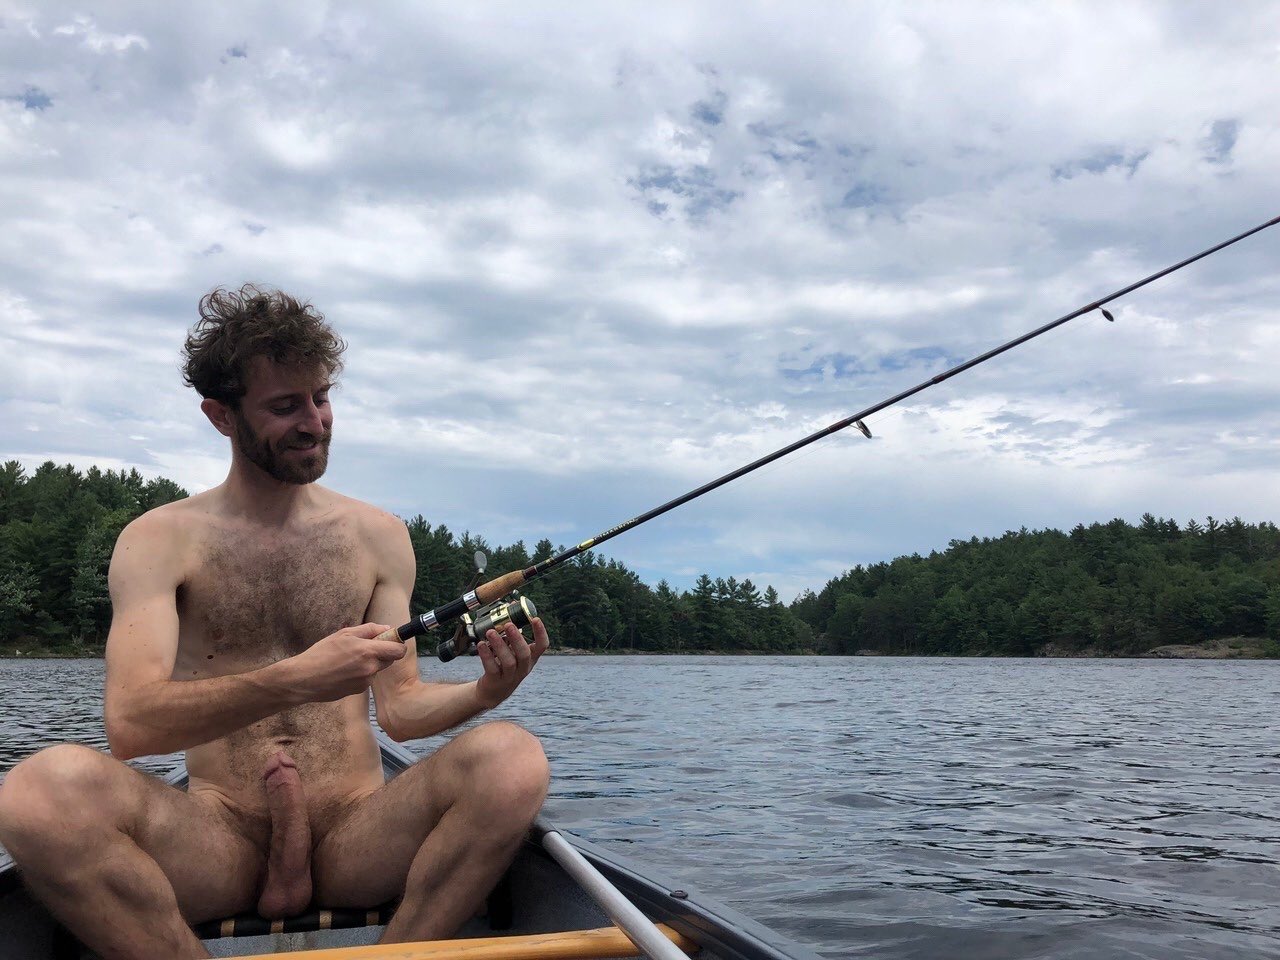 Who wants to join me for some fishing? 